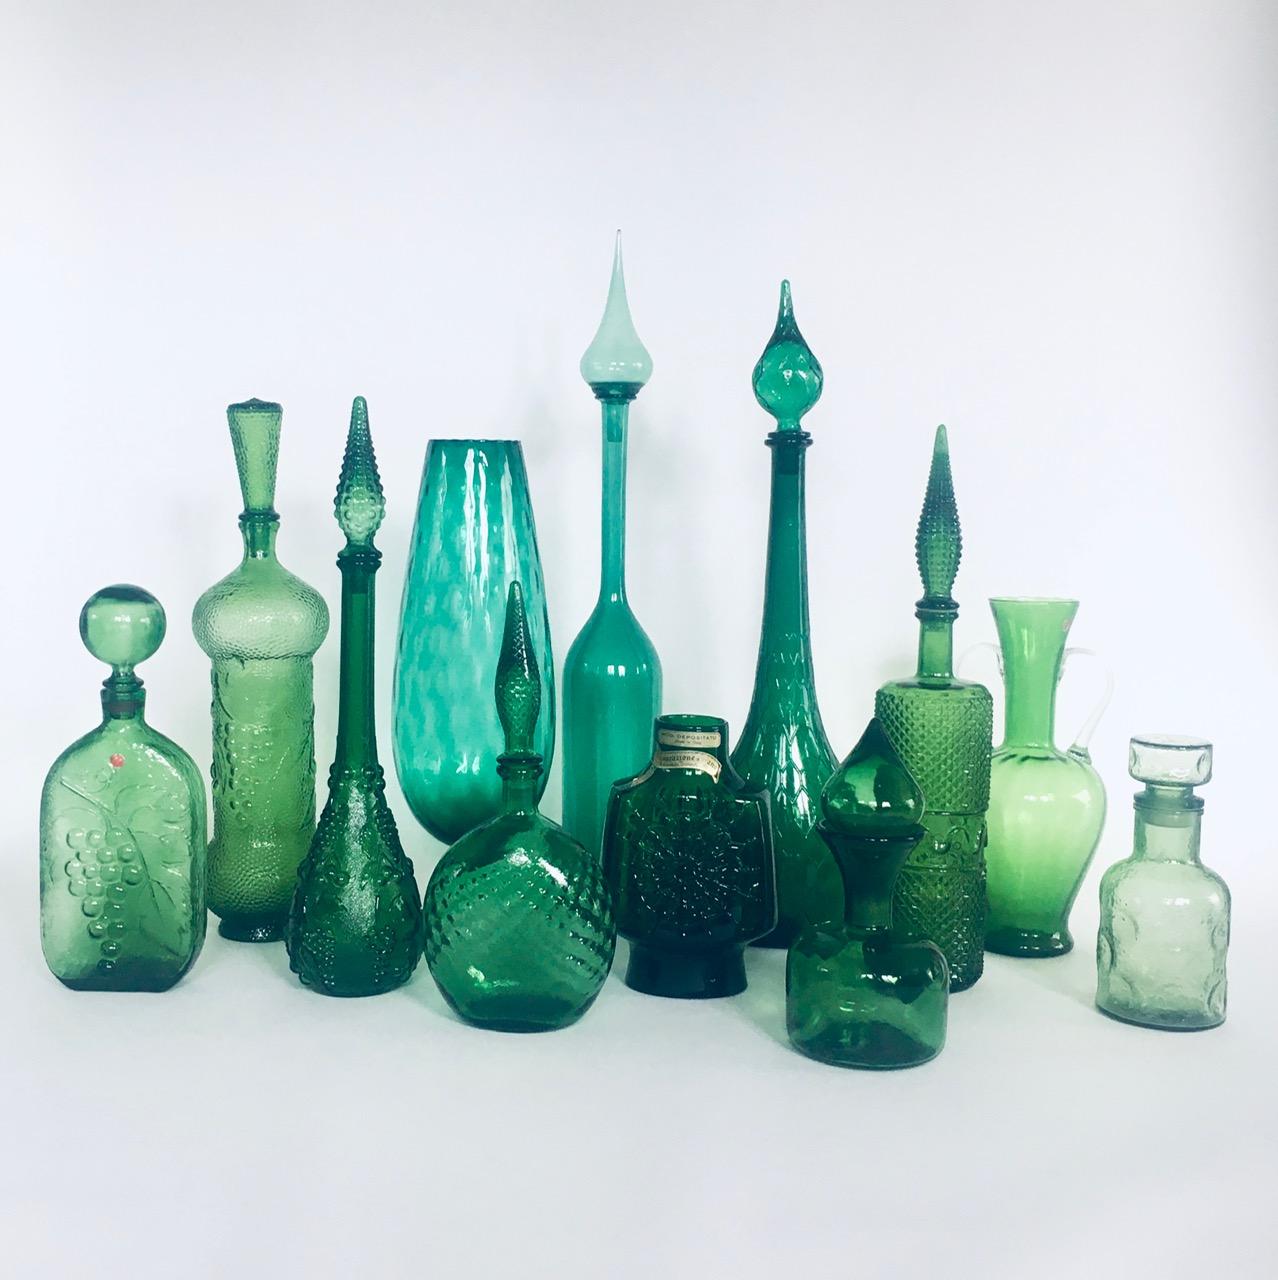 Collection of vintage Green Glass Vases & Decanters. All are made in the 1960's era. Italy and France made. Empoli and other design glass. Set of 12 different pieces. All are in green glass different tones, shapes and models. From 25cm to 71cm tall.